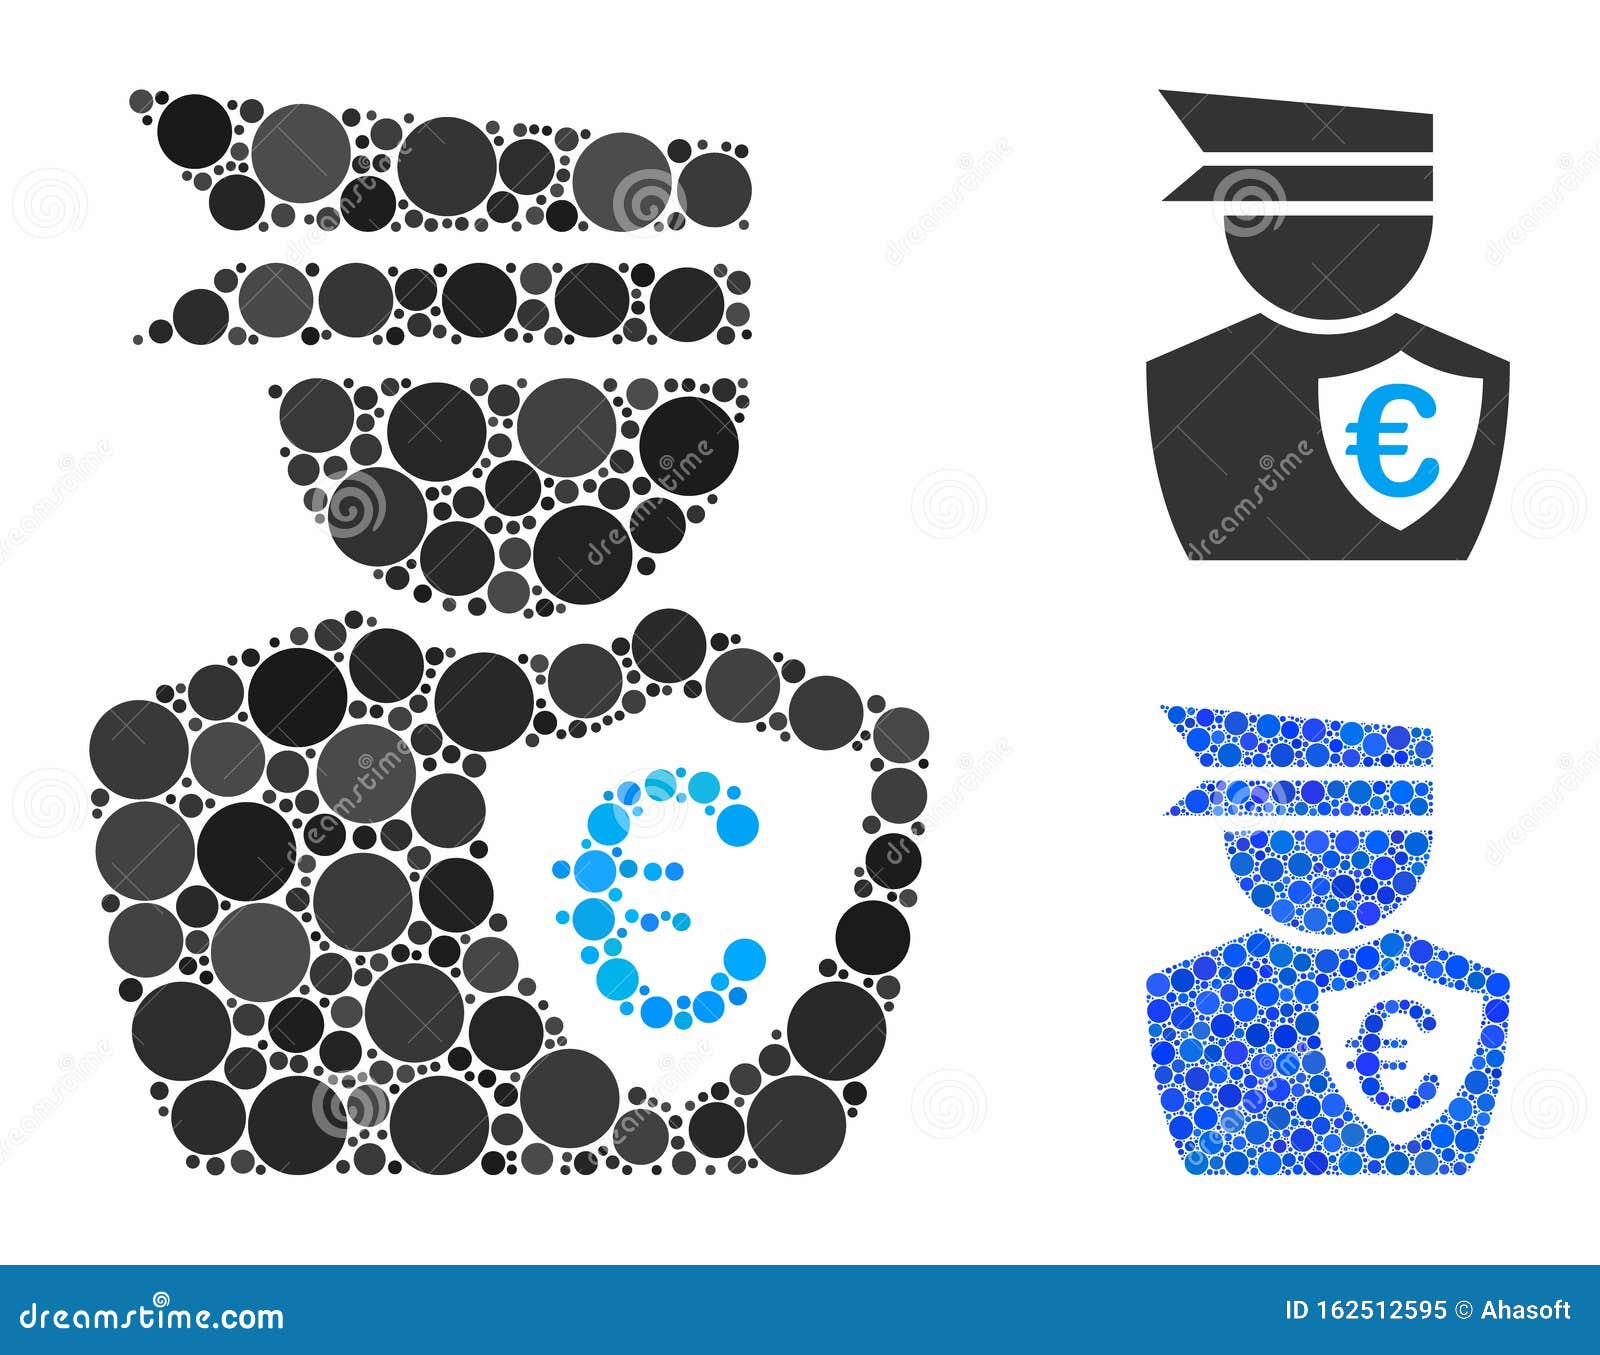 euro commissioner composition icon of spheric items